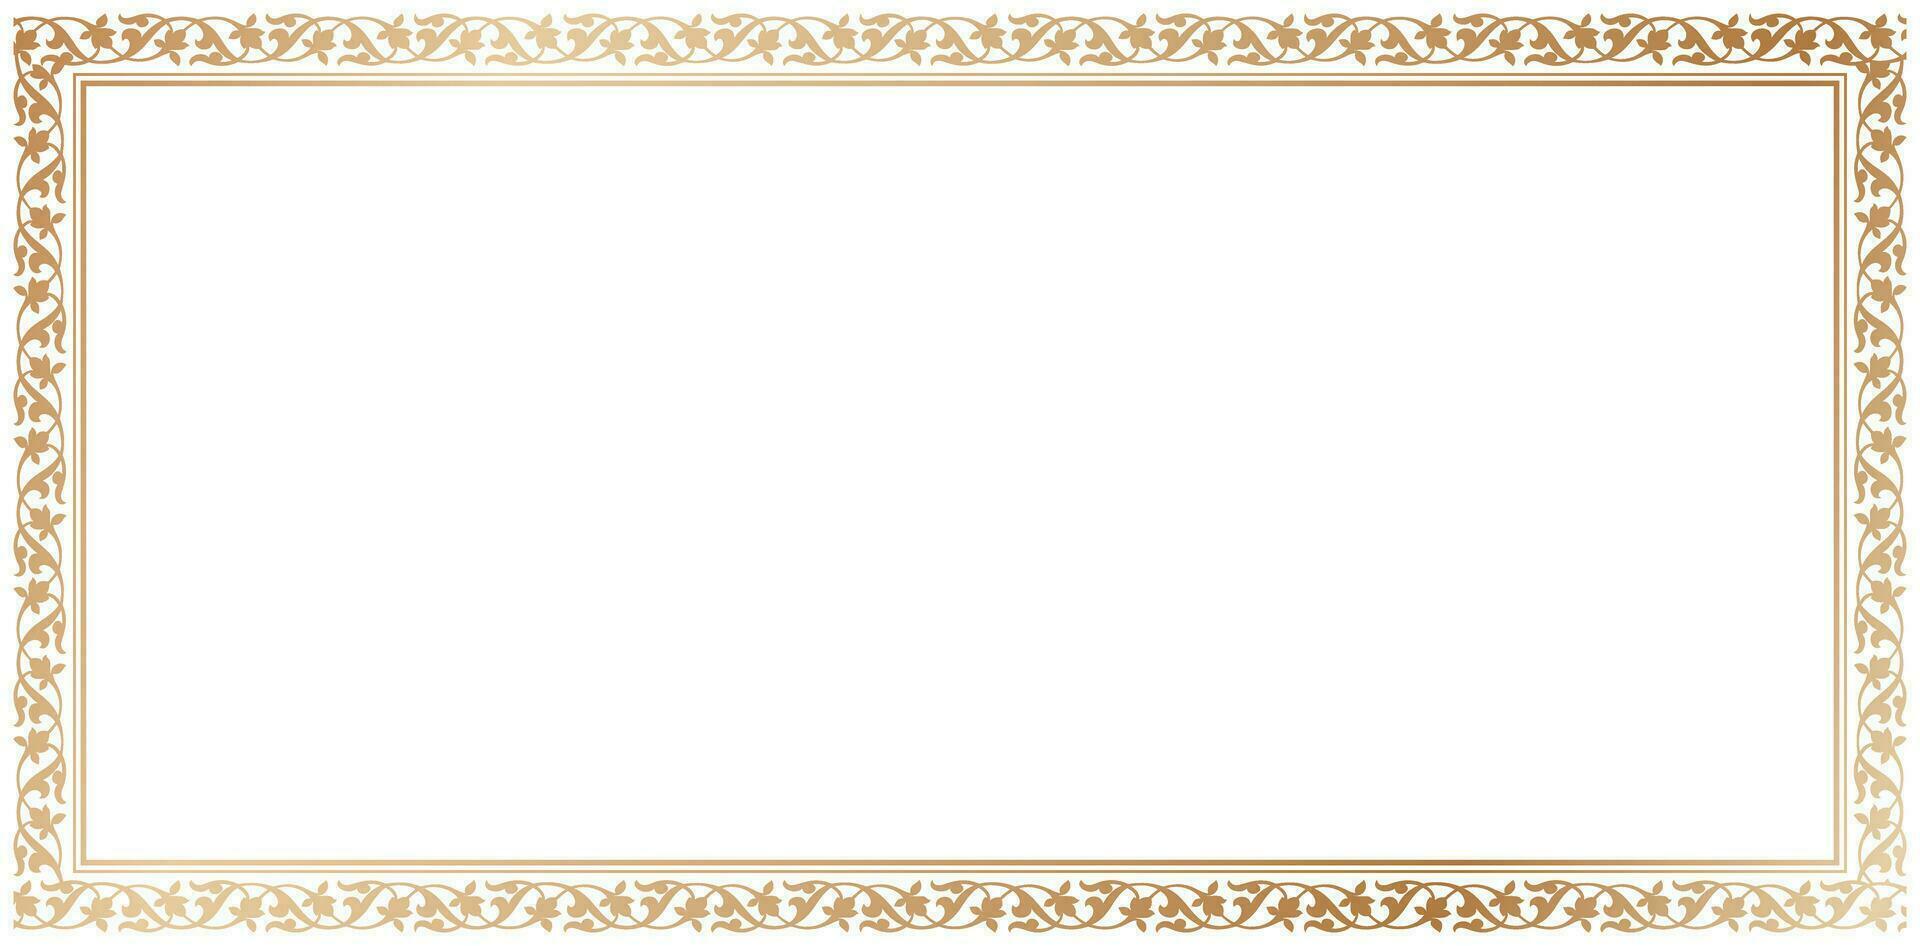 Decorative rectangle frame ornament Elegant element for design in Eastern style, place for text. Floral golden border. Lace illustration for invitations and greeting cards, certificate of completions vector